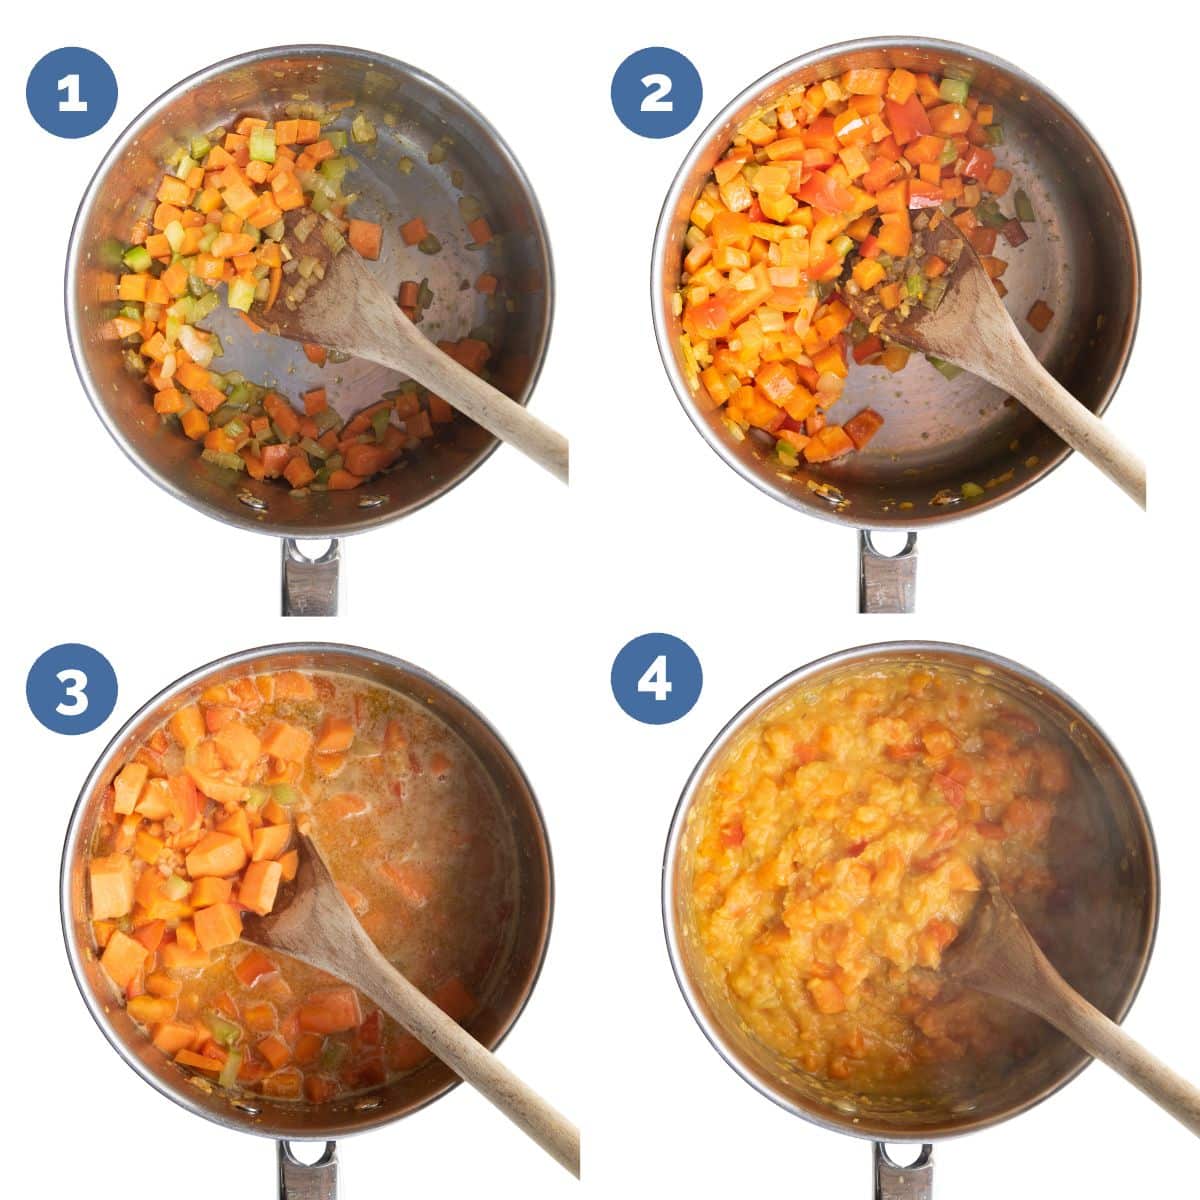 Collage of 4 Images Showing How to Make Lentil Puree.